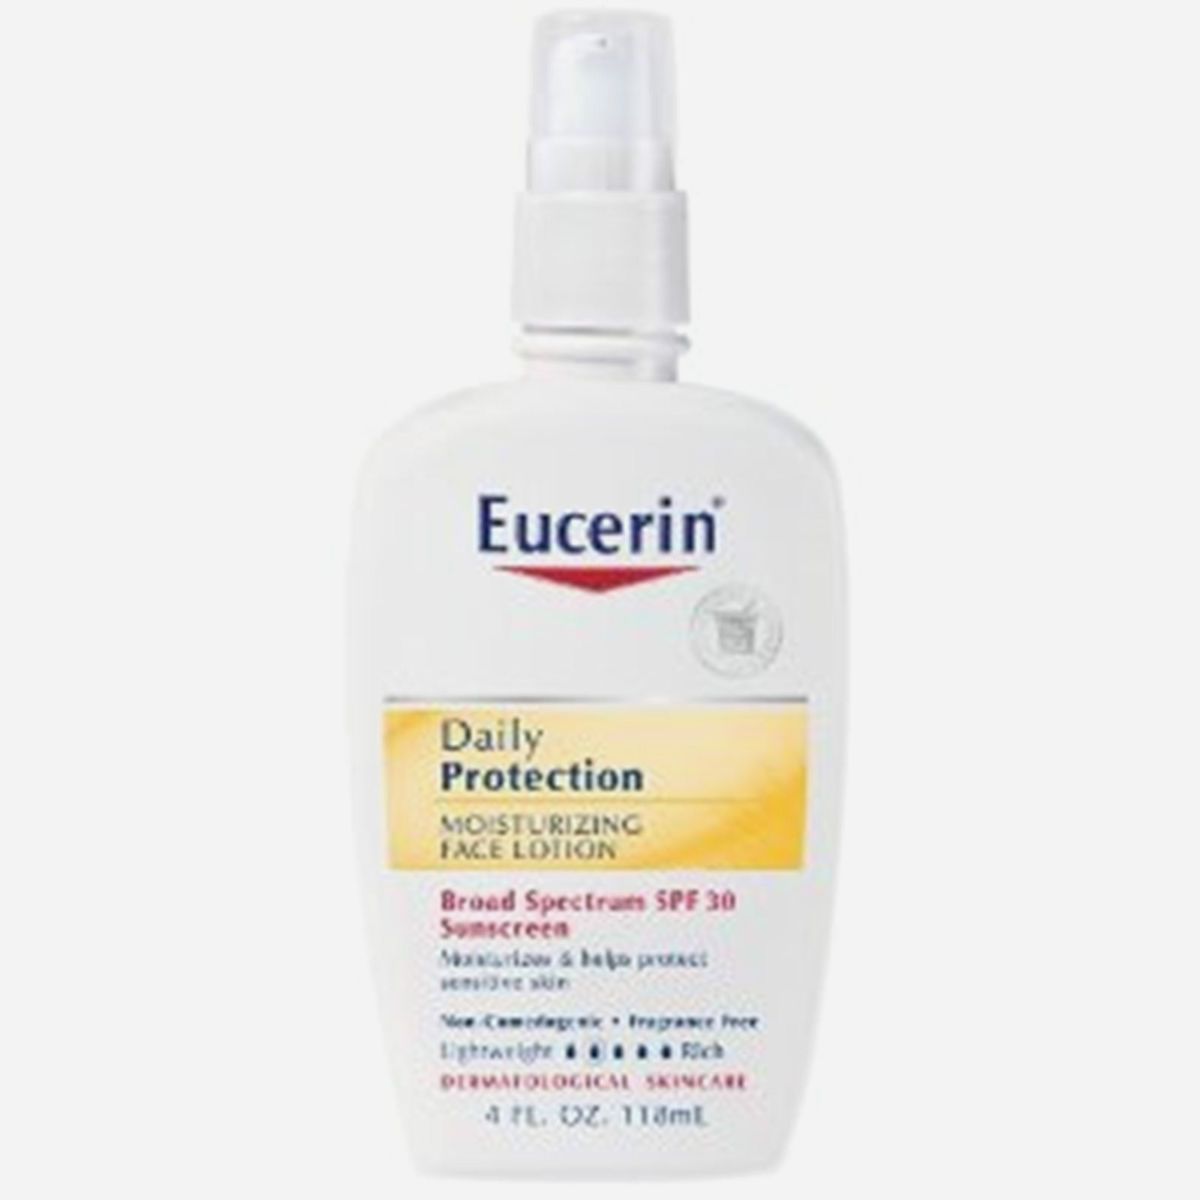 Eucerin Everyday Protection Face Lotion SPF 30 072140634292